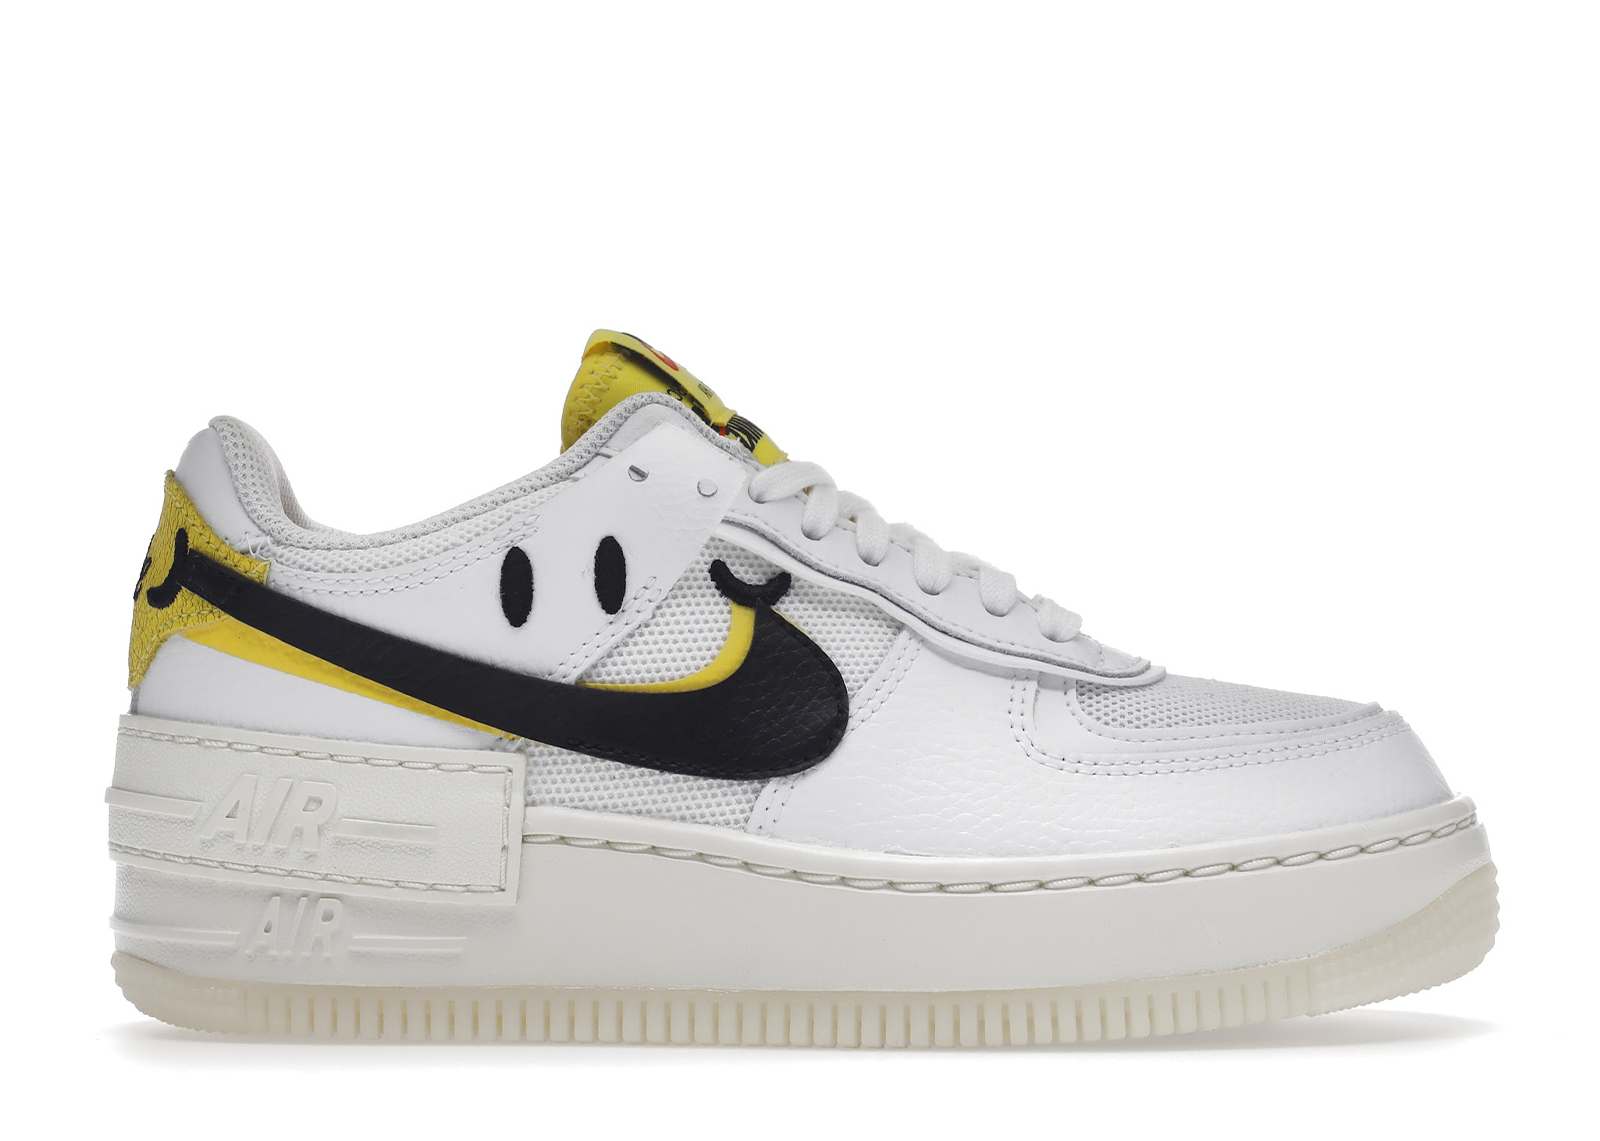 Nike Air Force 1 Low '07 LV8 Go The Extra The Smile (GS) キッズ